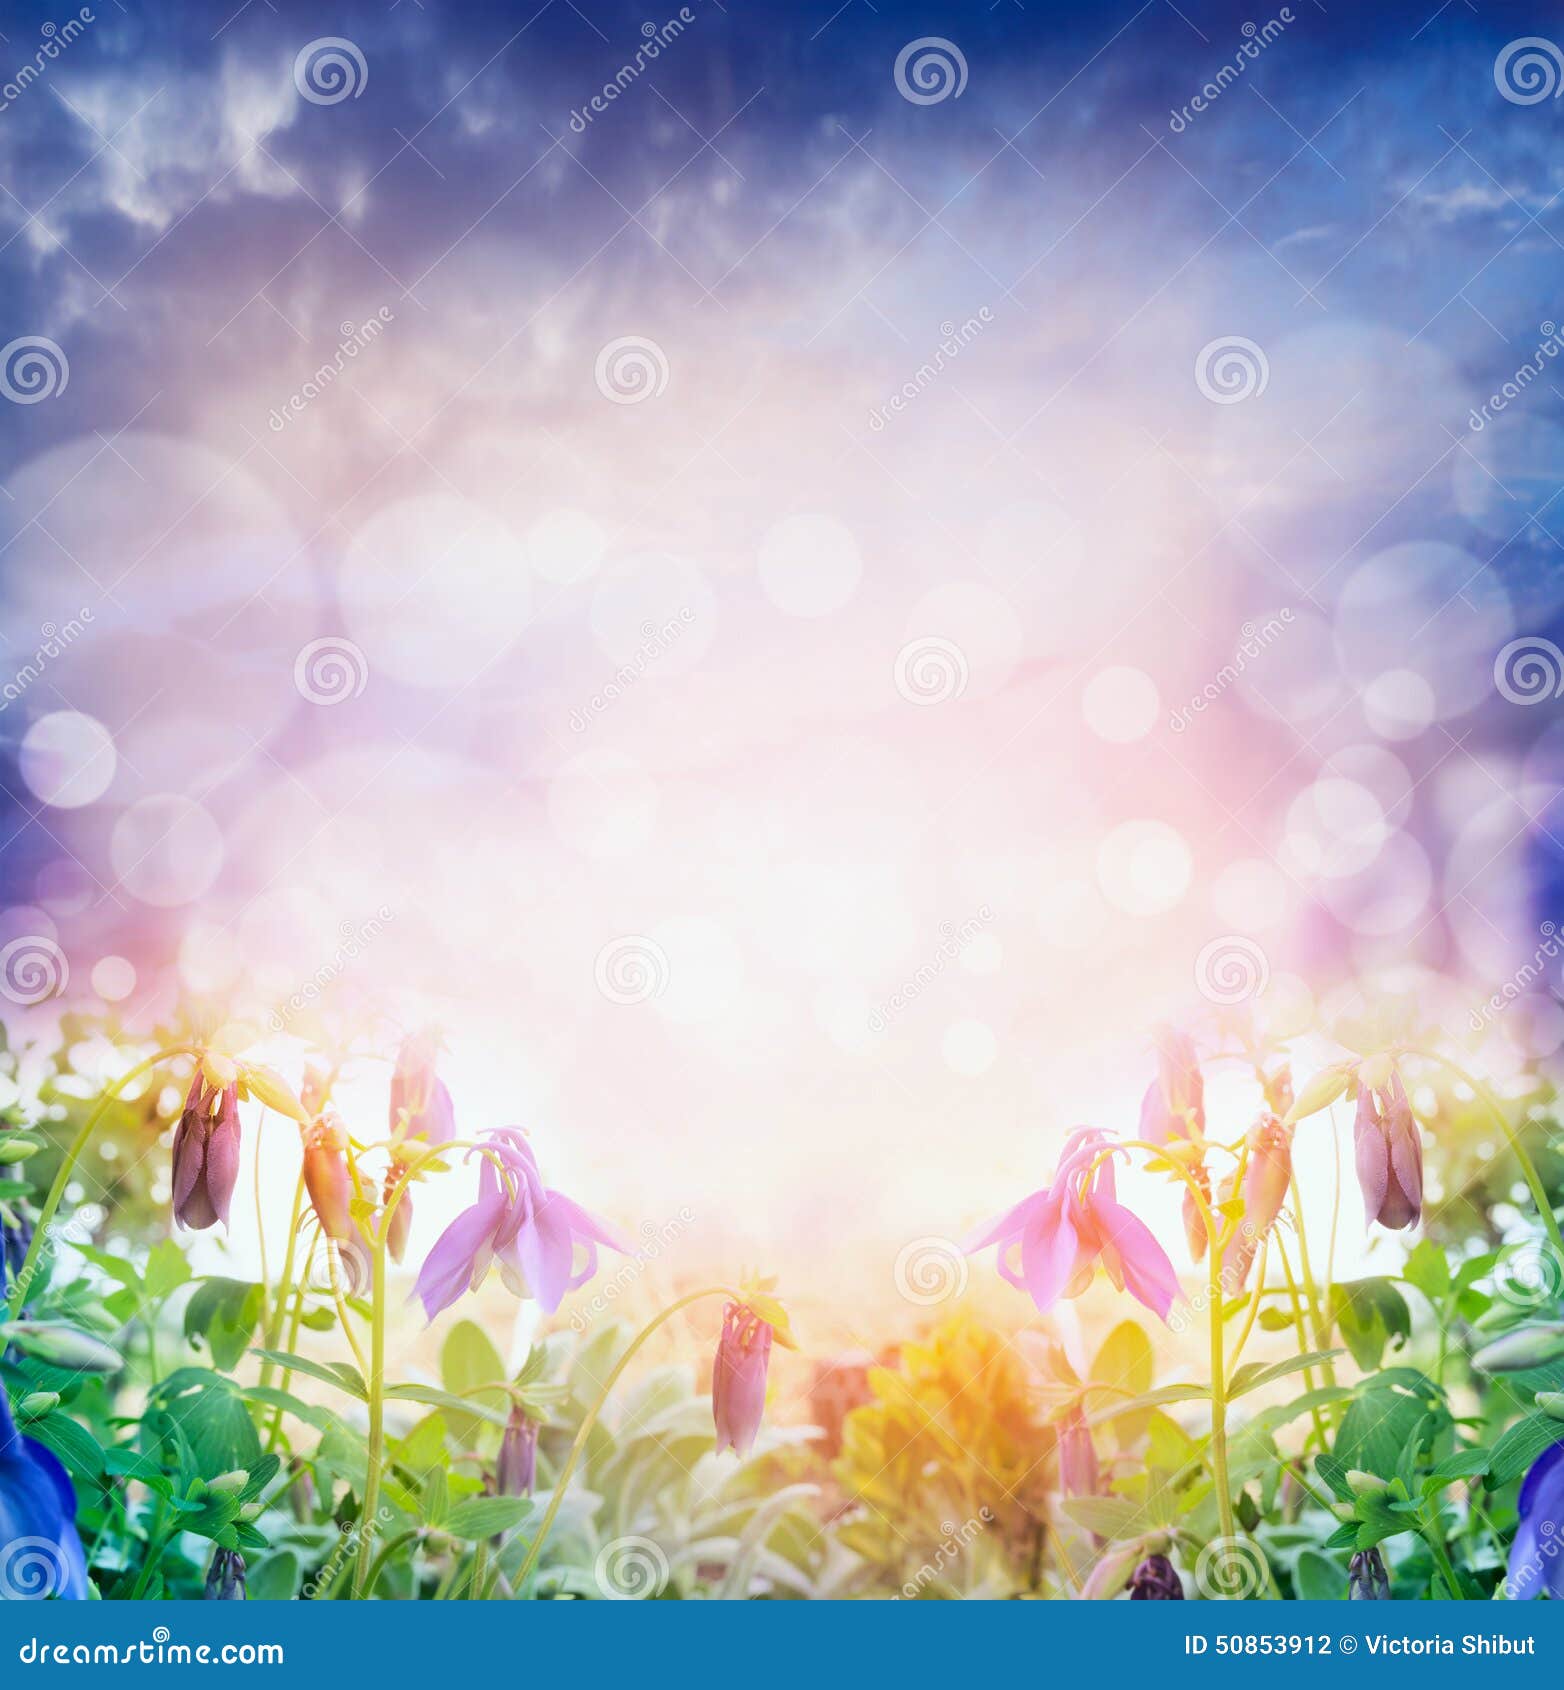 Light Nature Background with Summer Flowers Over Bokeh Stock Photo - Image  of bright, blur: 50853912